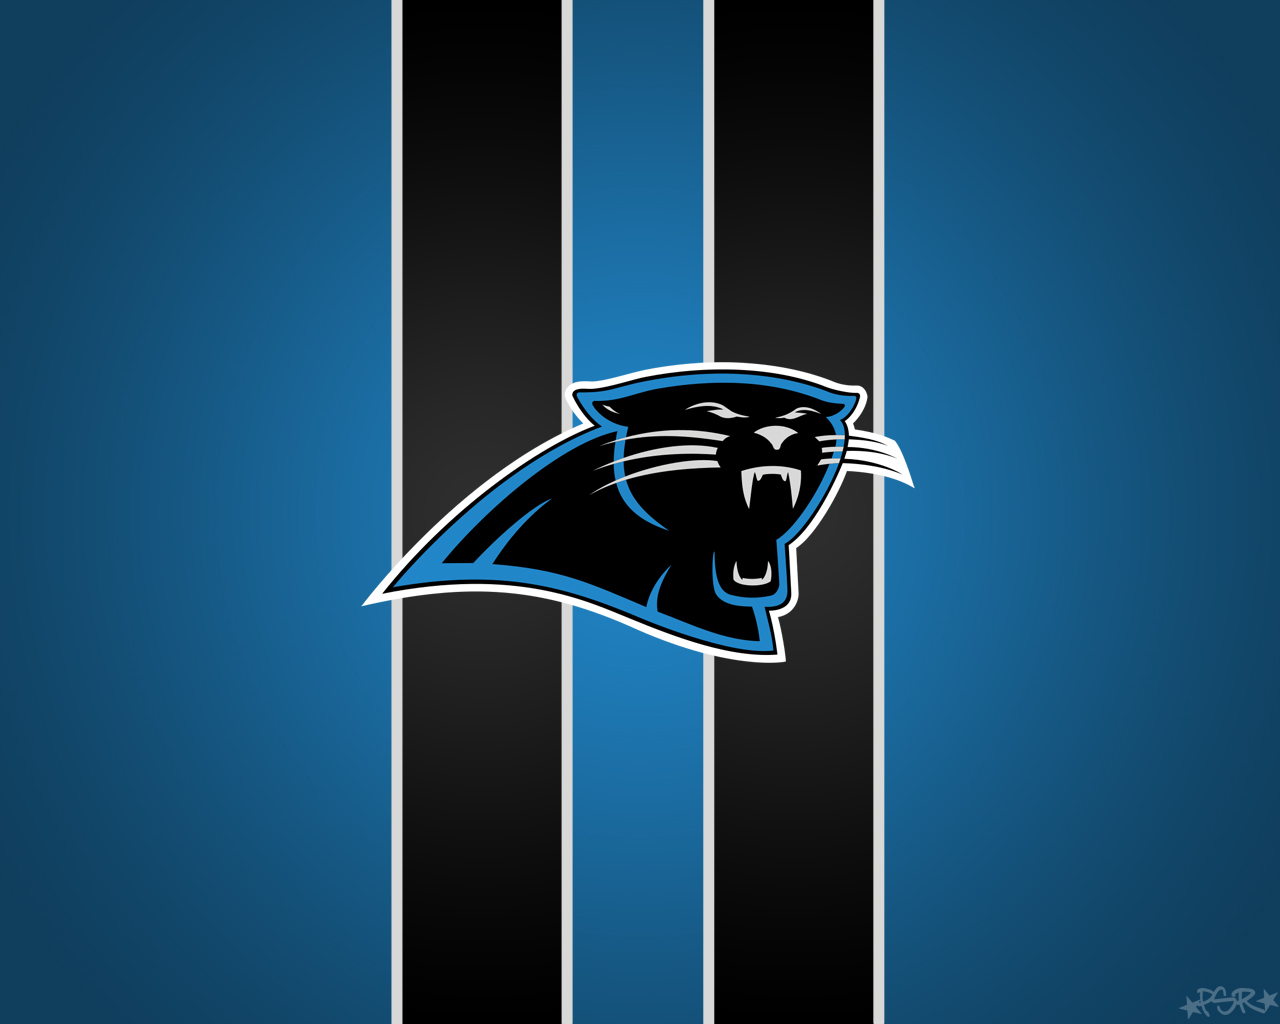 Panthers Logo with Stripes on Blue Background by pasar3 1280 x 1280x1024